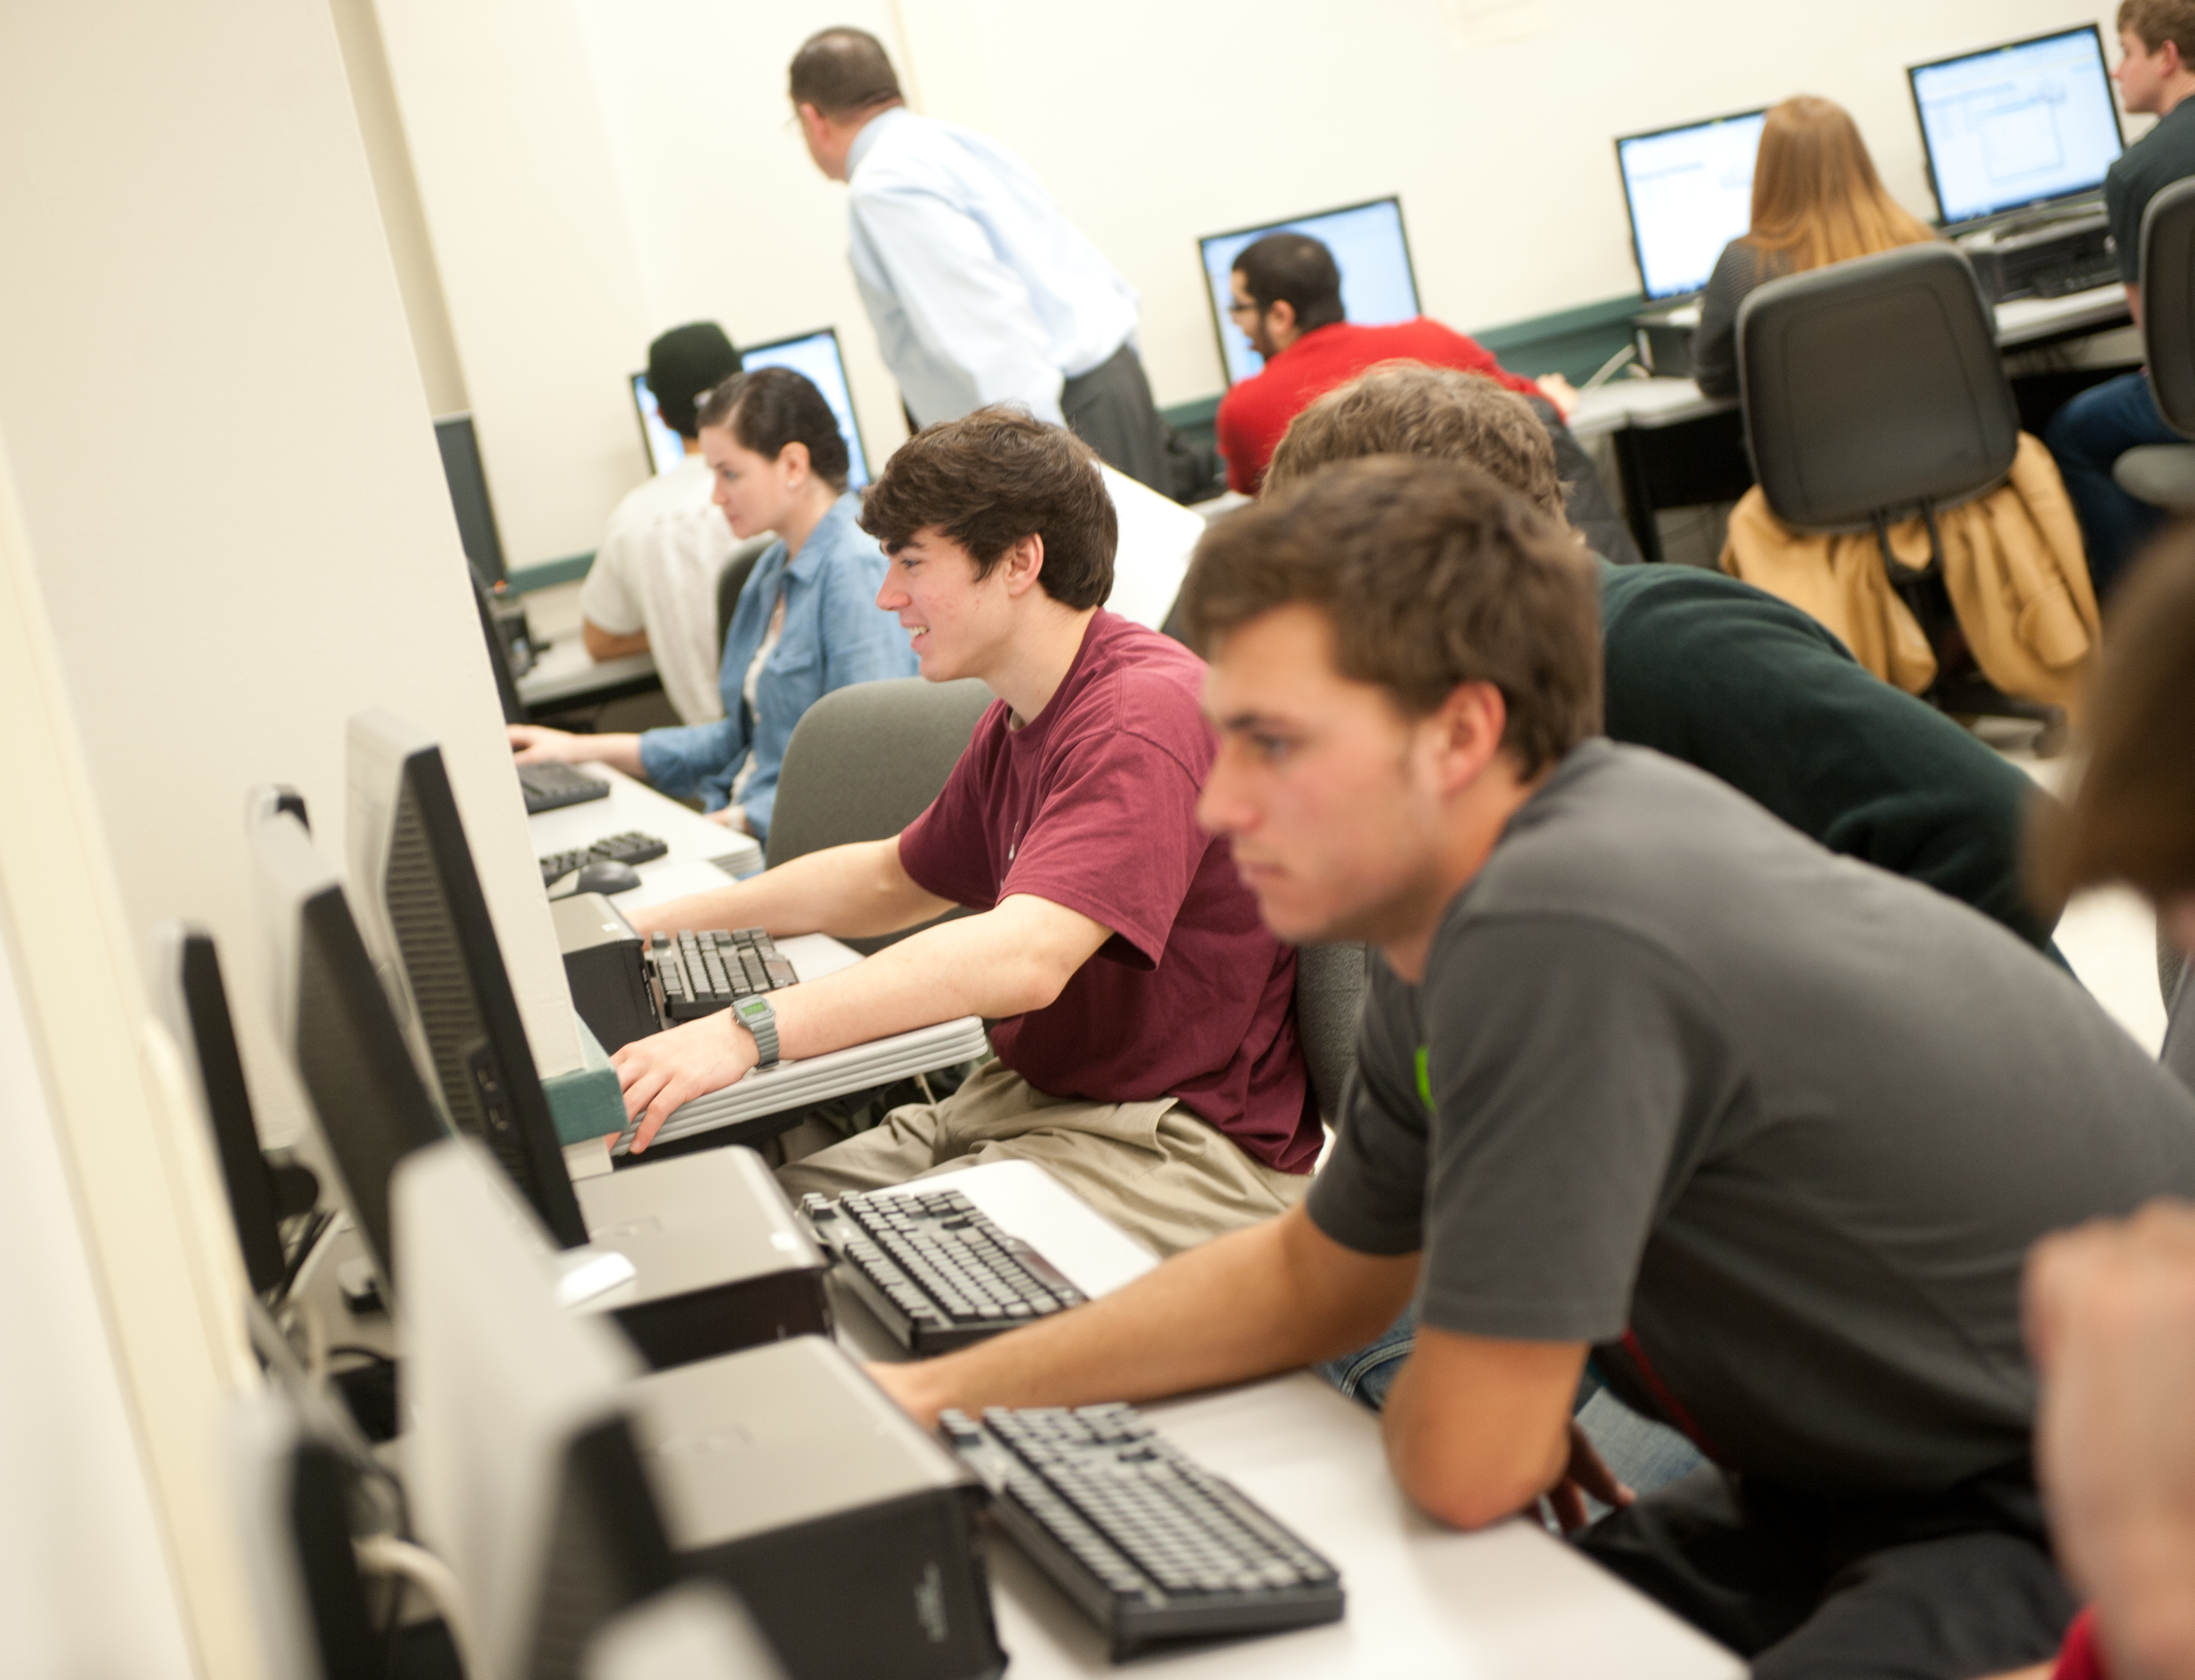 Students in a computer lab, with an instructor offering guidance to a student